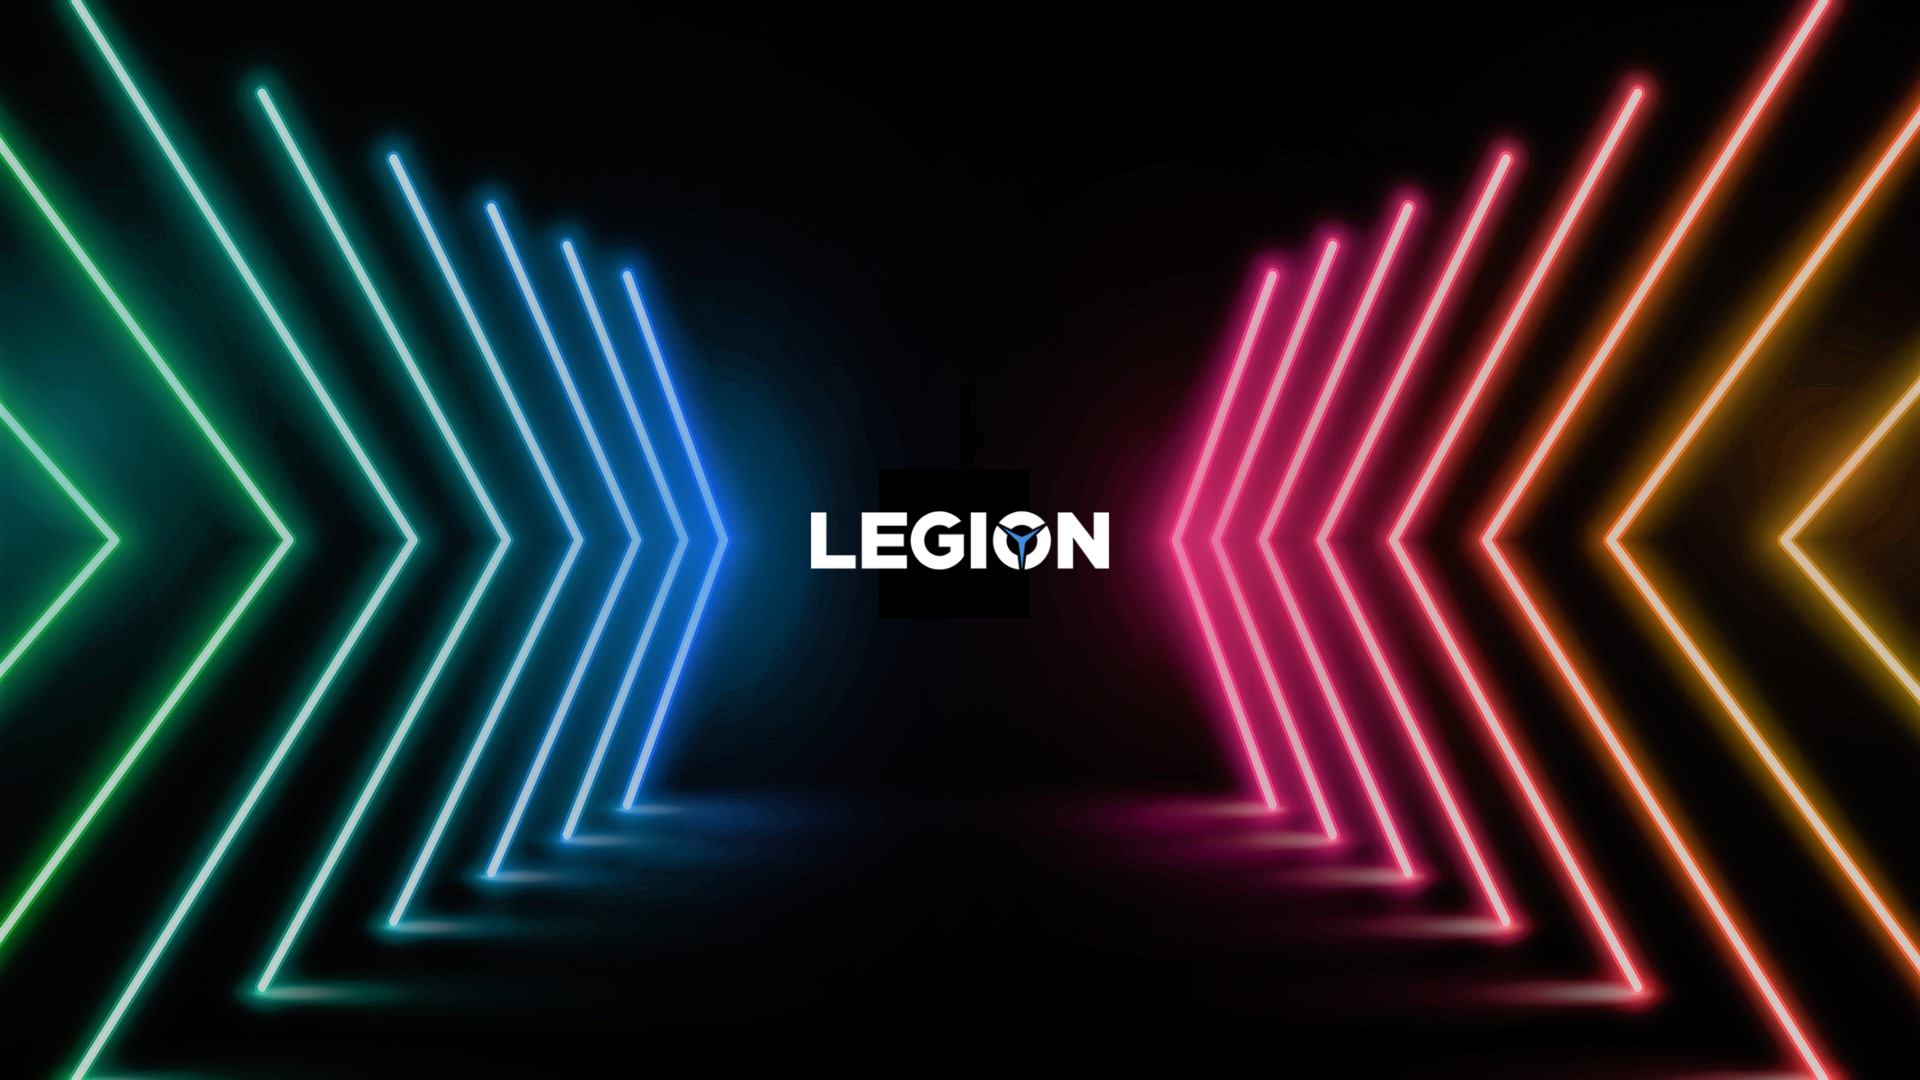 Loved The Razer Neon Wallpaper So Created My Own For Legion